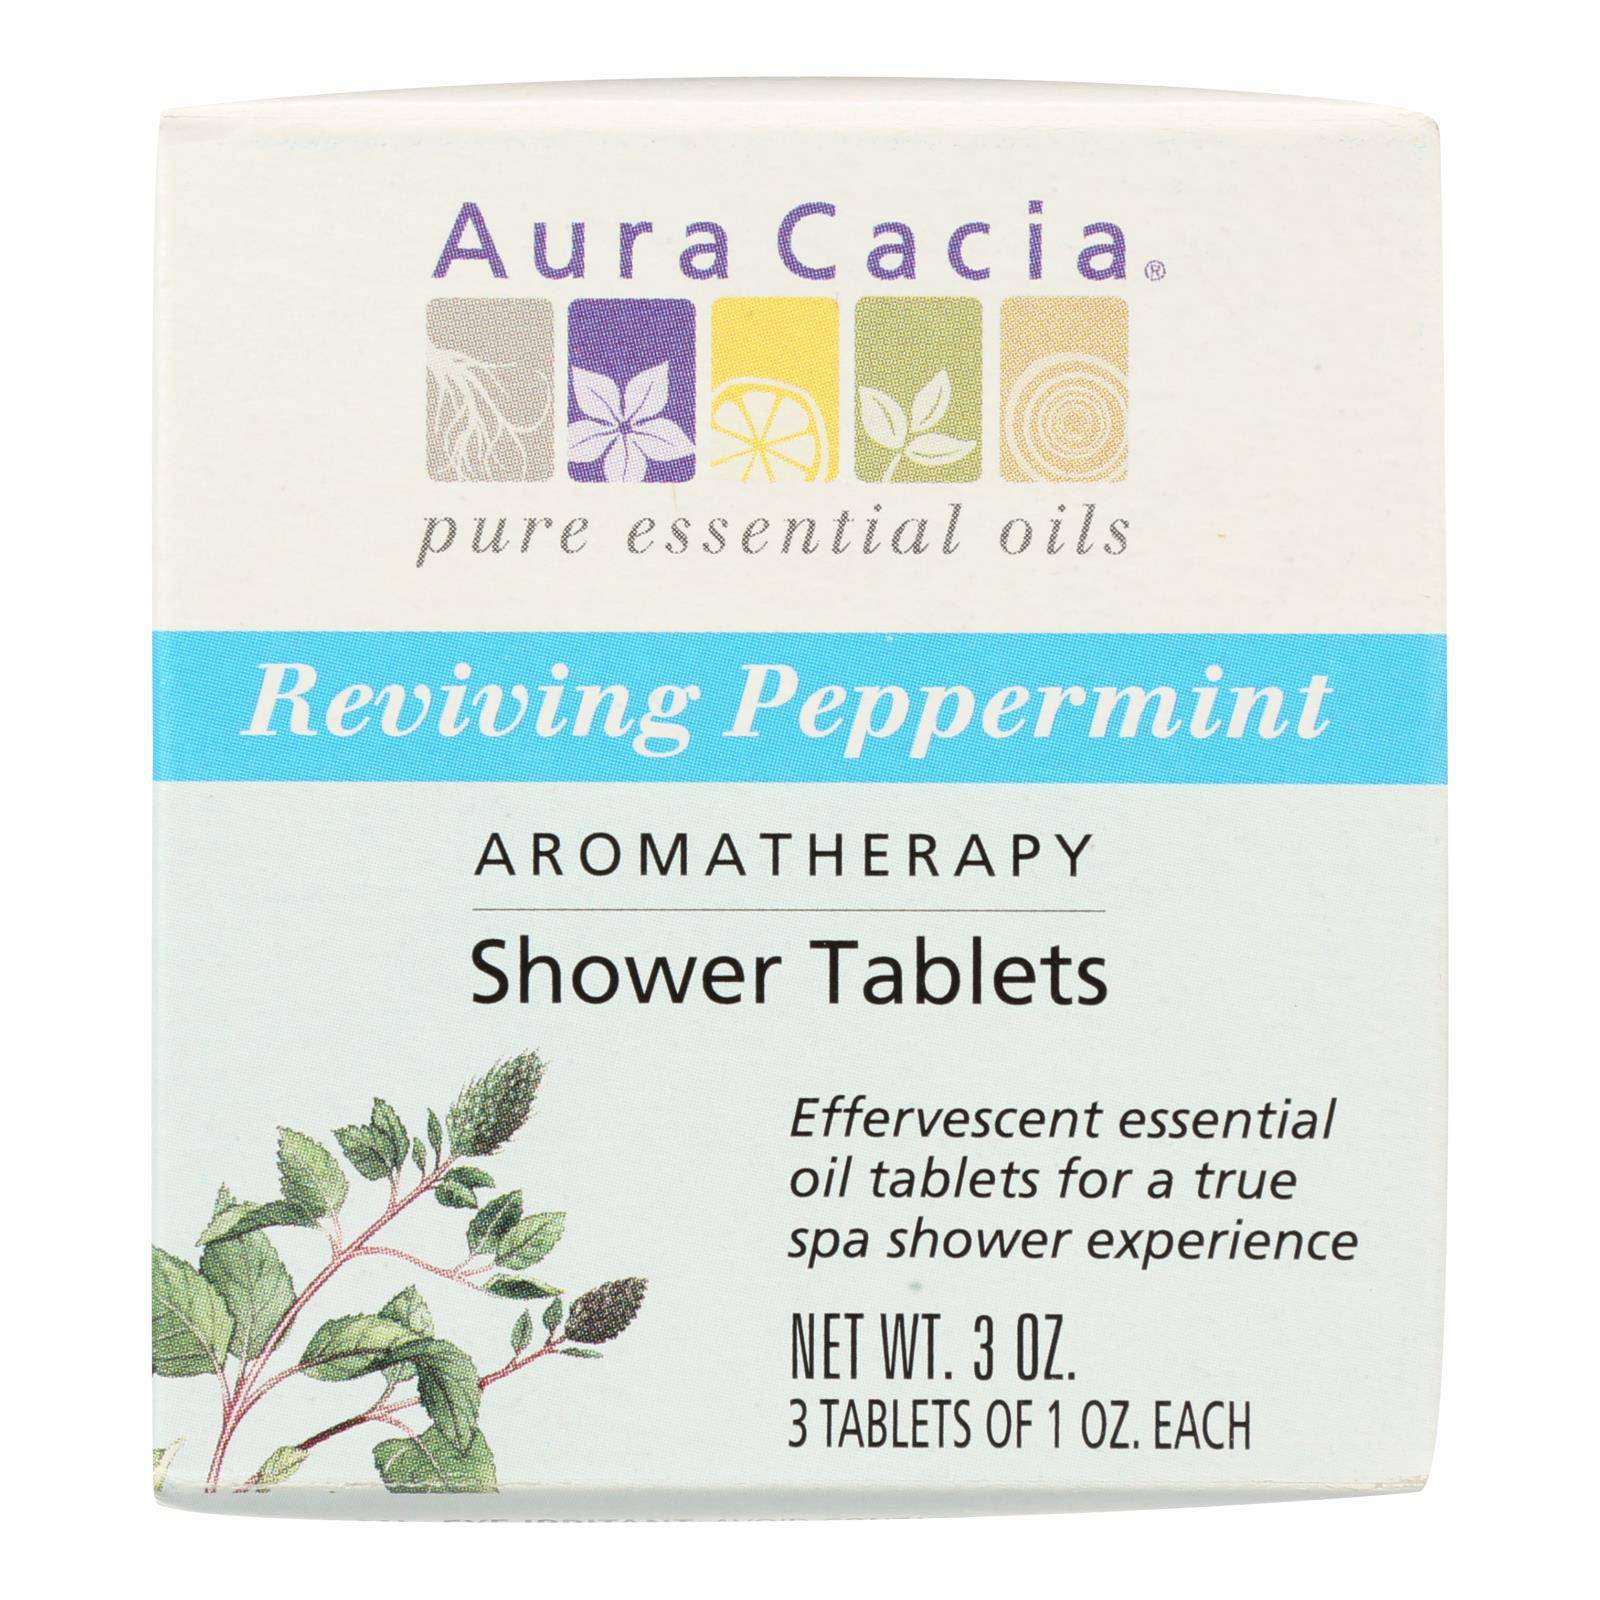 Buy Aura Cacia - Reviving Aromatherapy Shower Tablets Peppermint - 3 Tablets  at OnlyNaturals.us